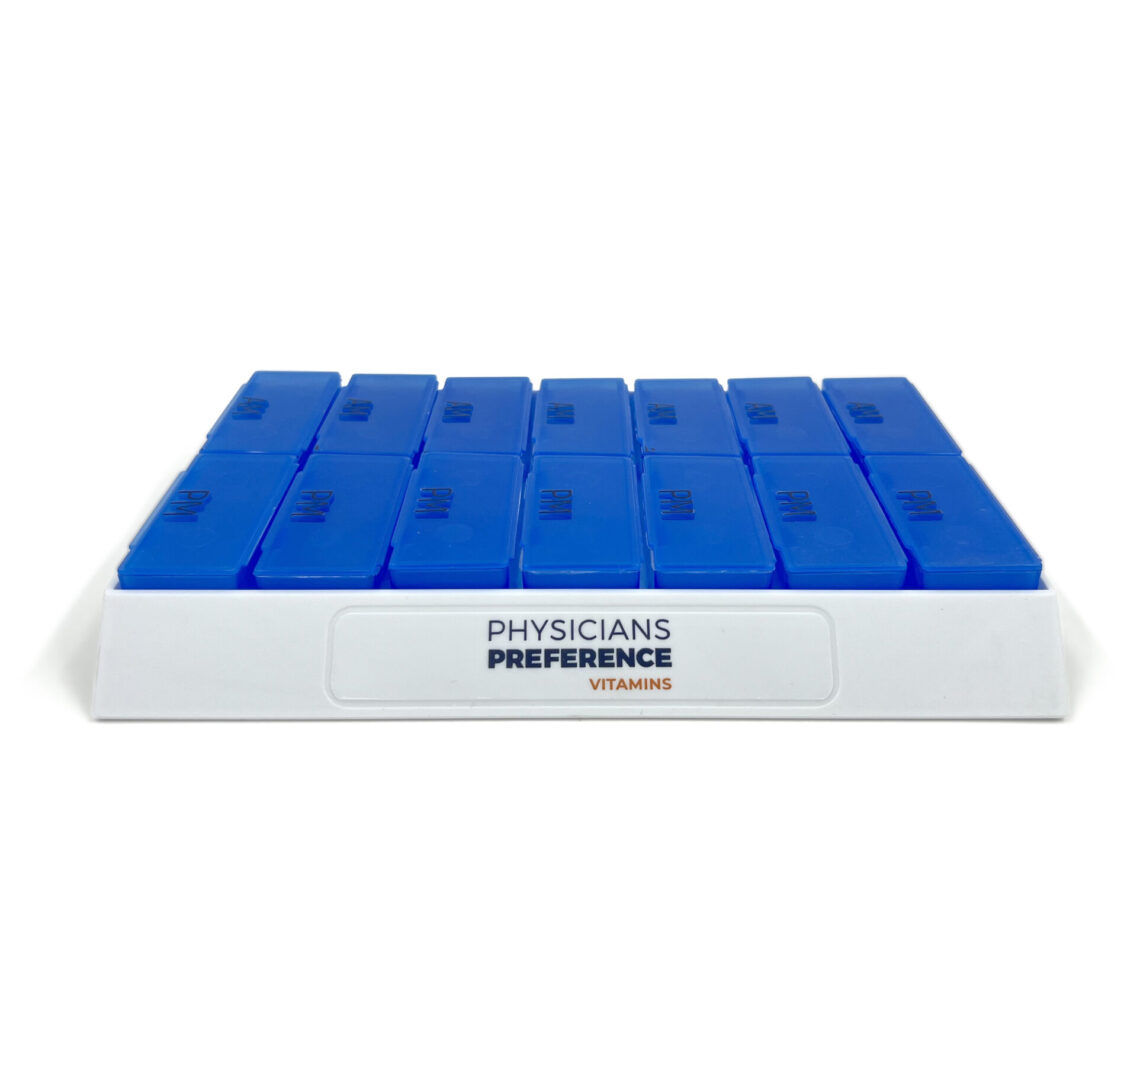 A blue and white tray with many small blocks